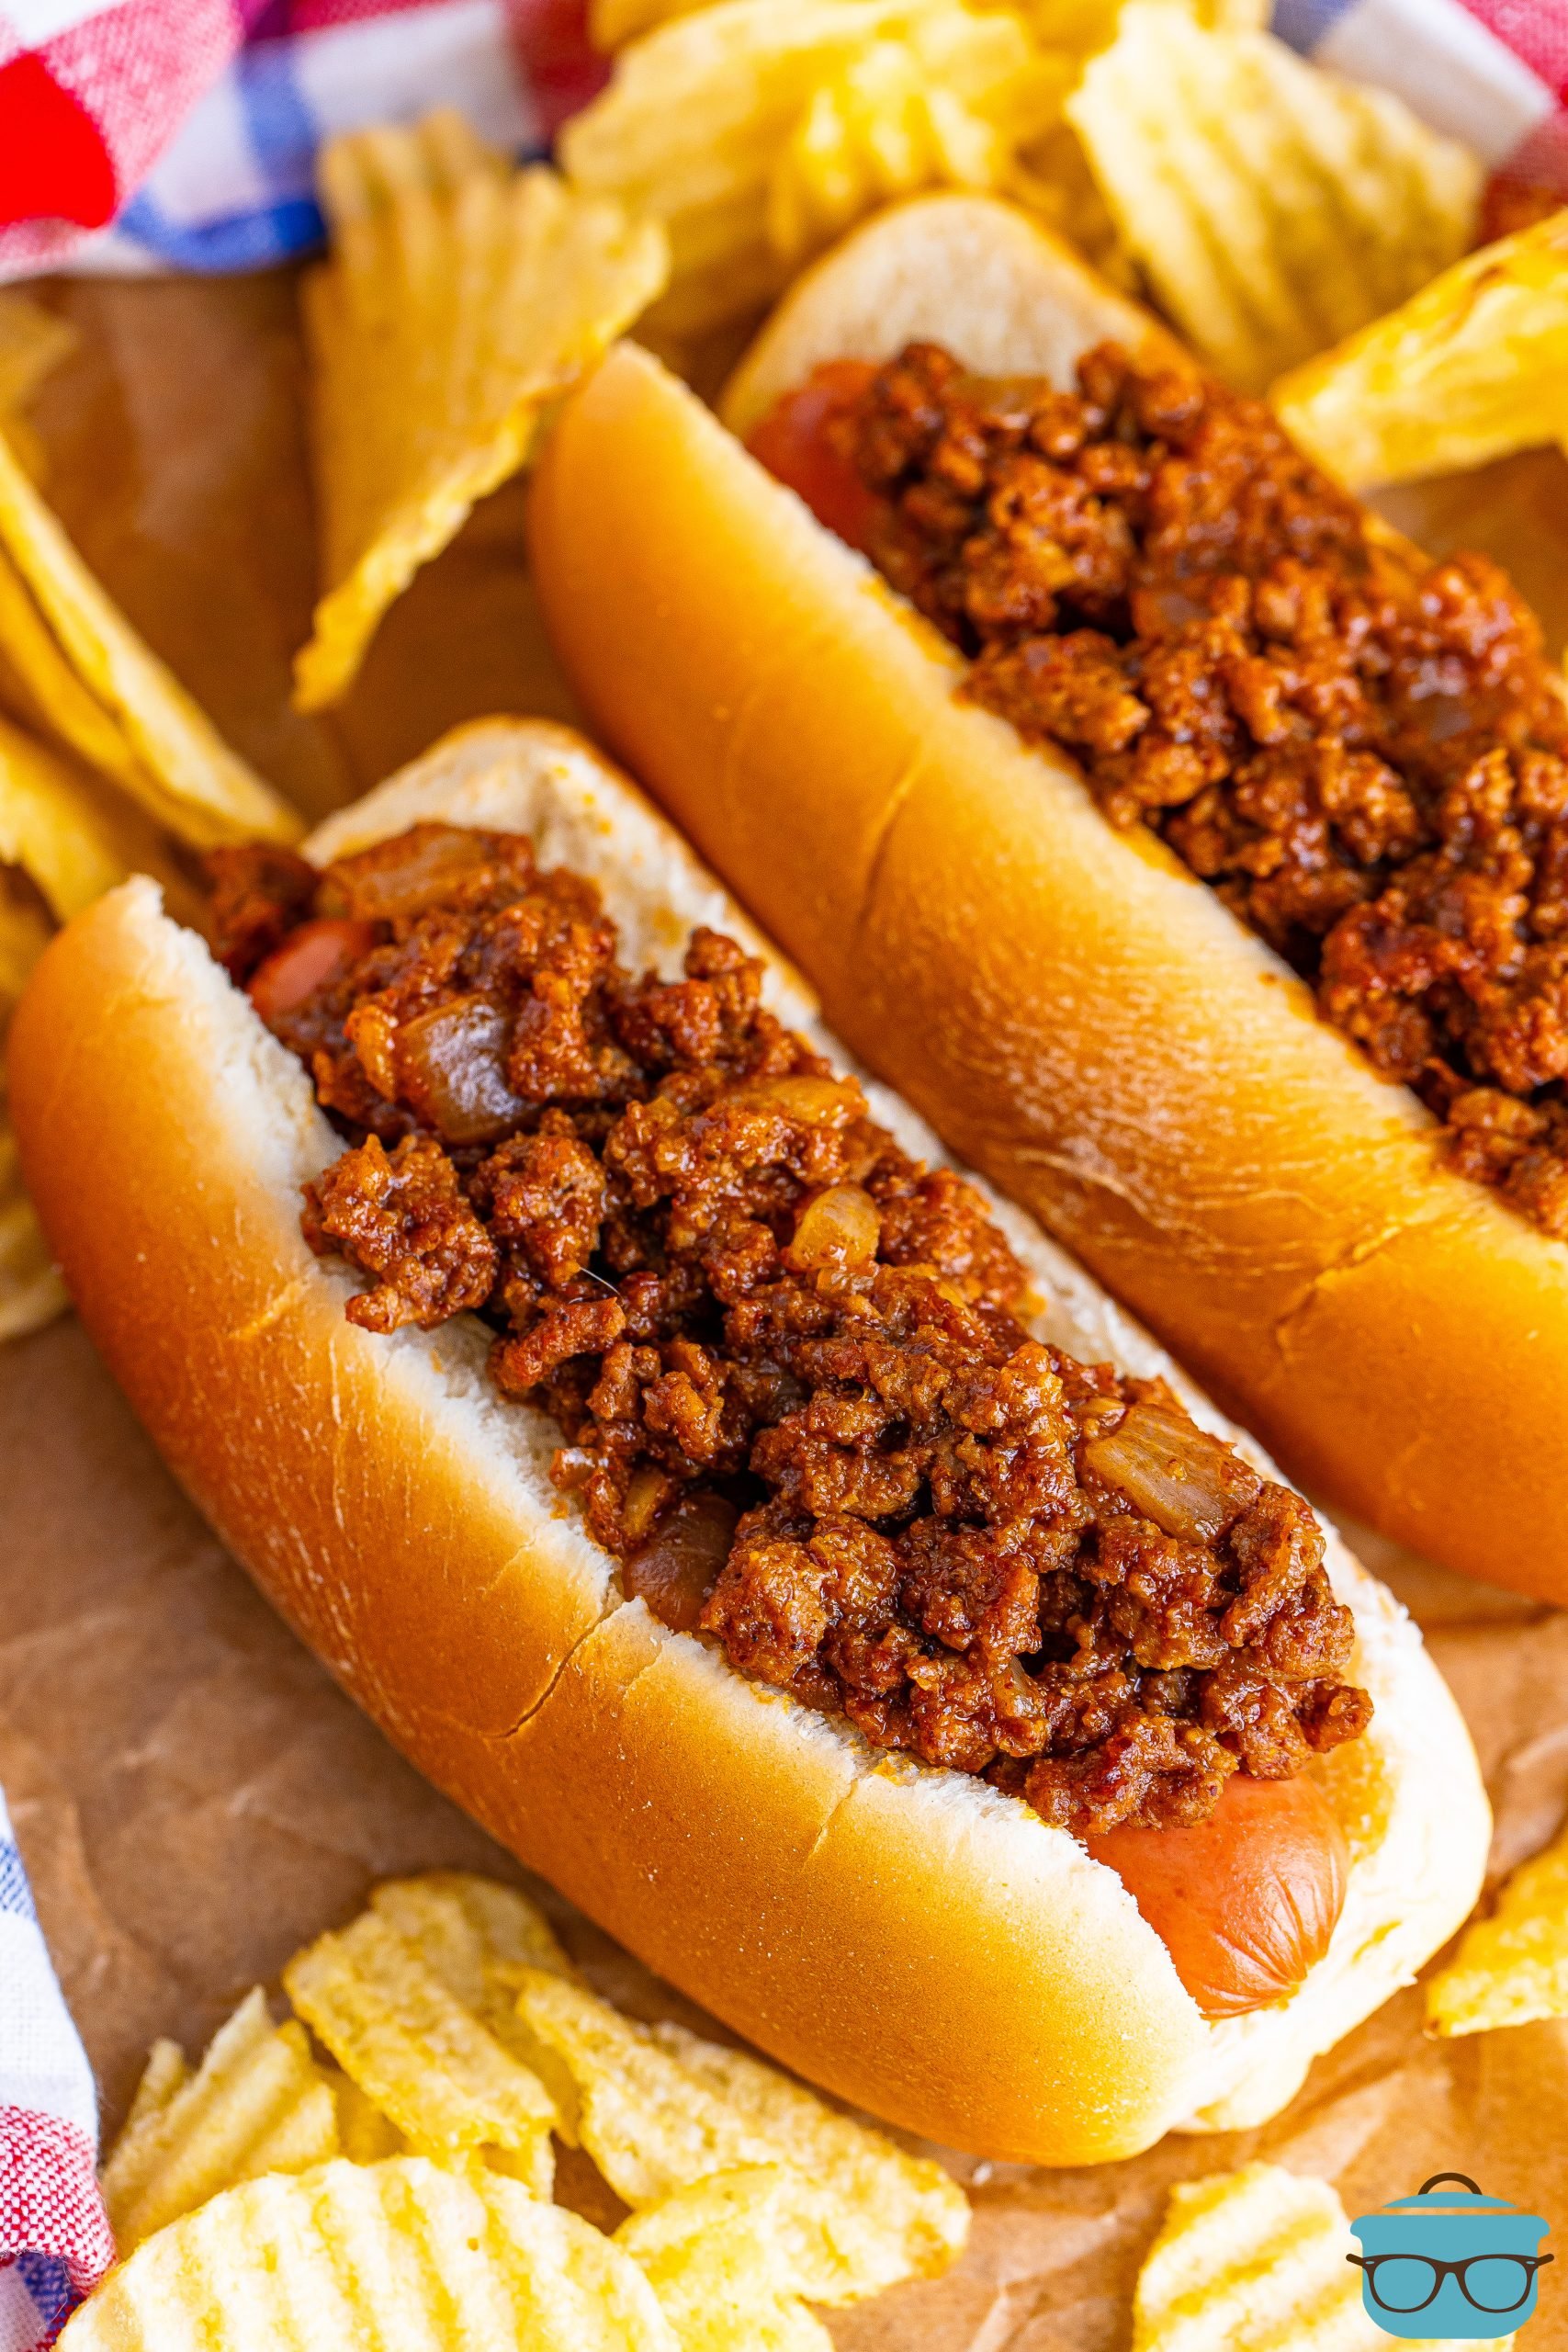 Looking down on two hot dogs with homemade Hot Dog Chili.